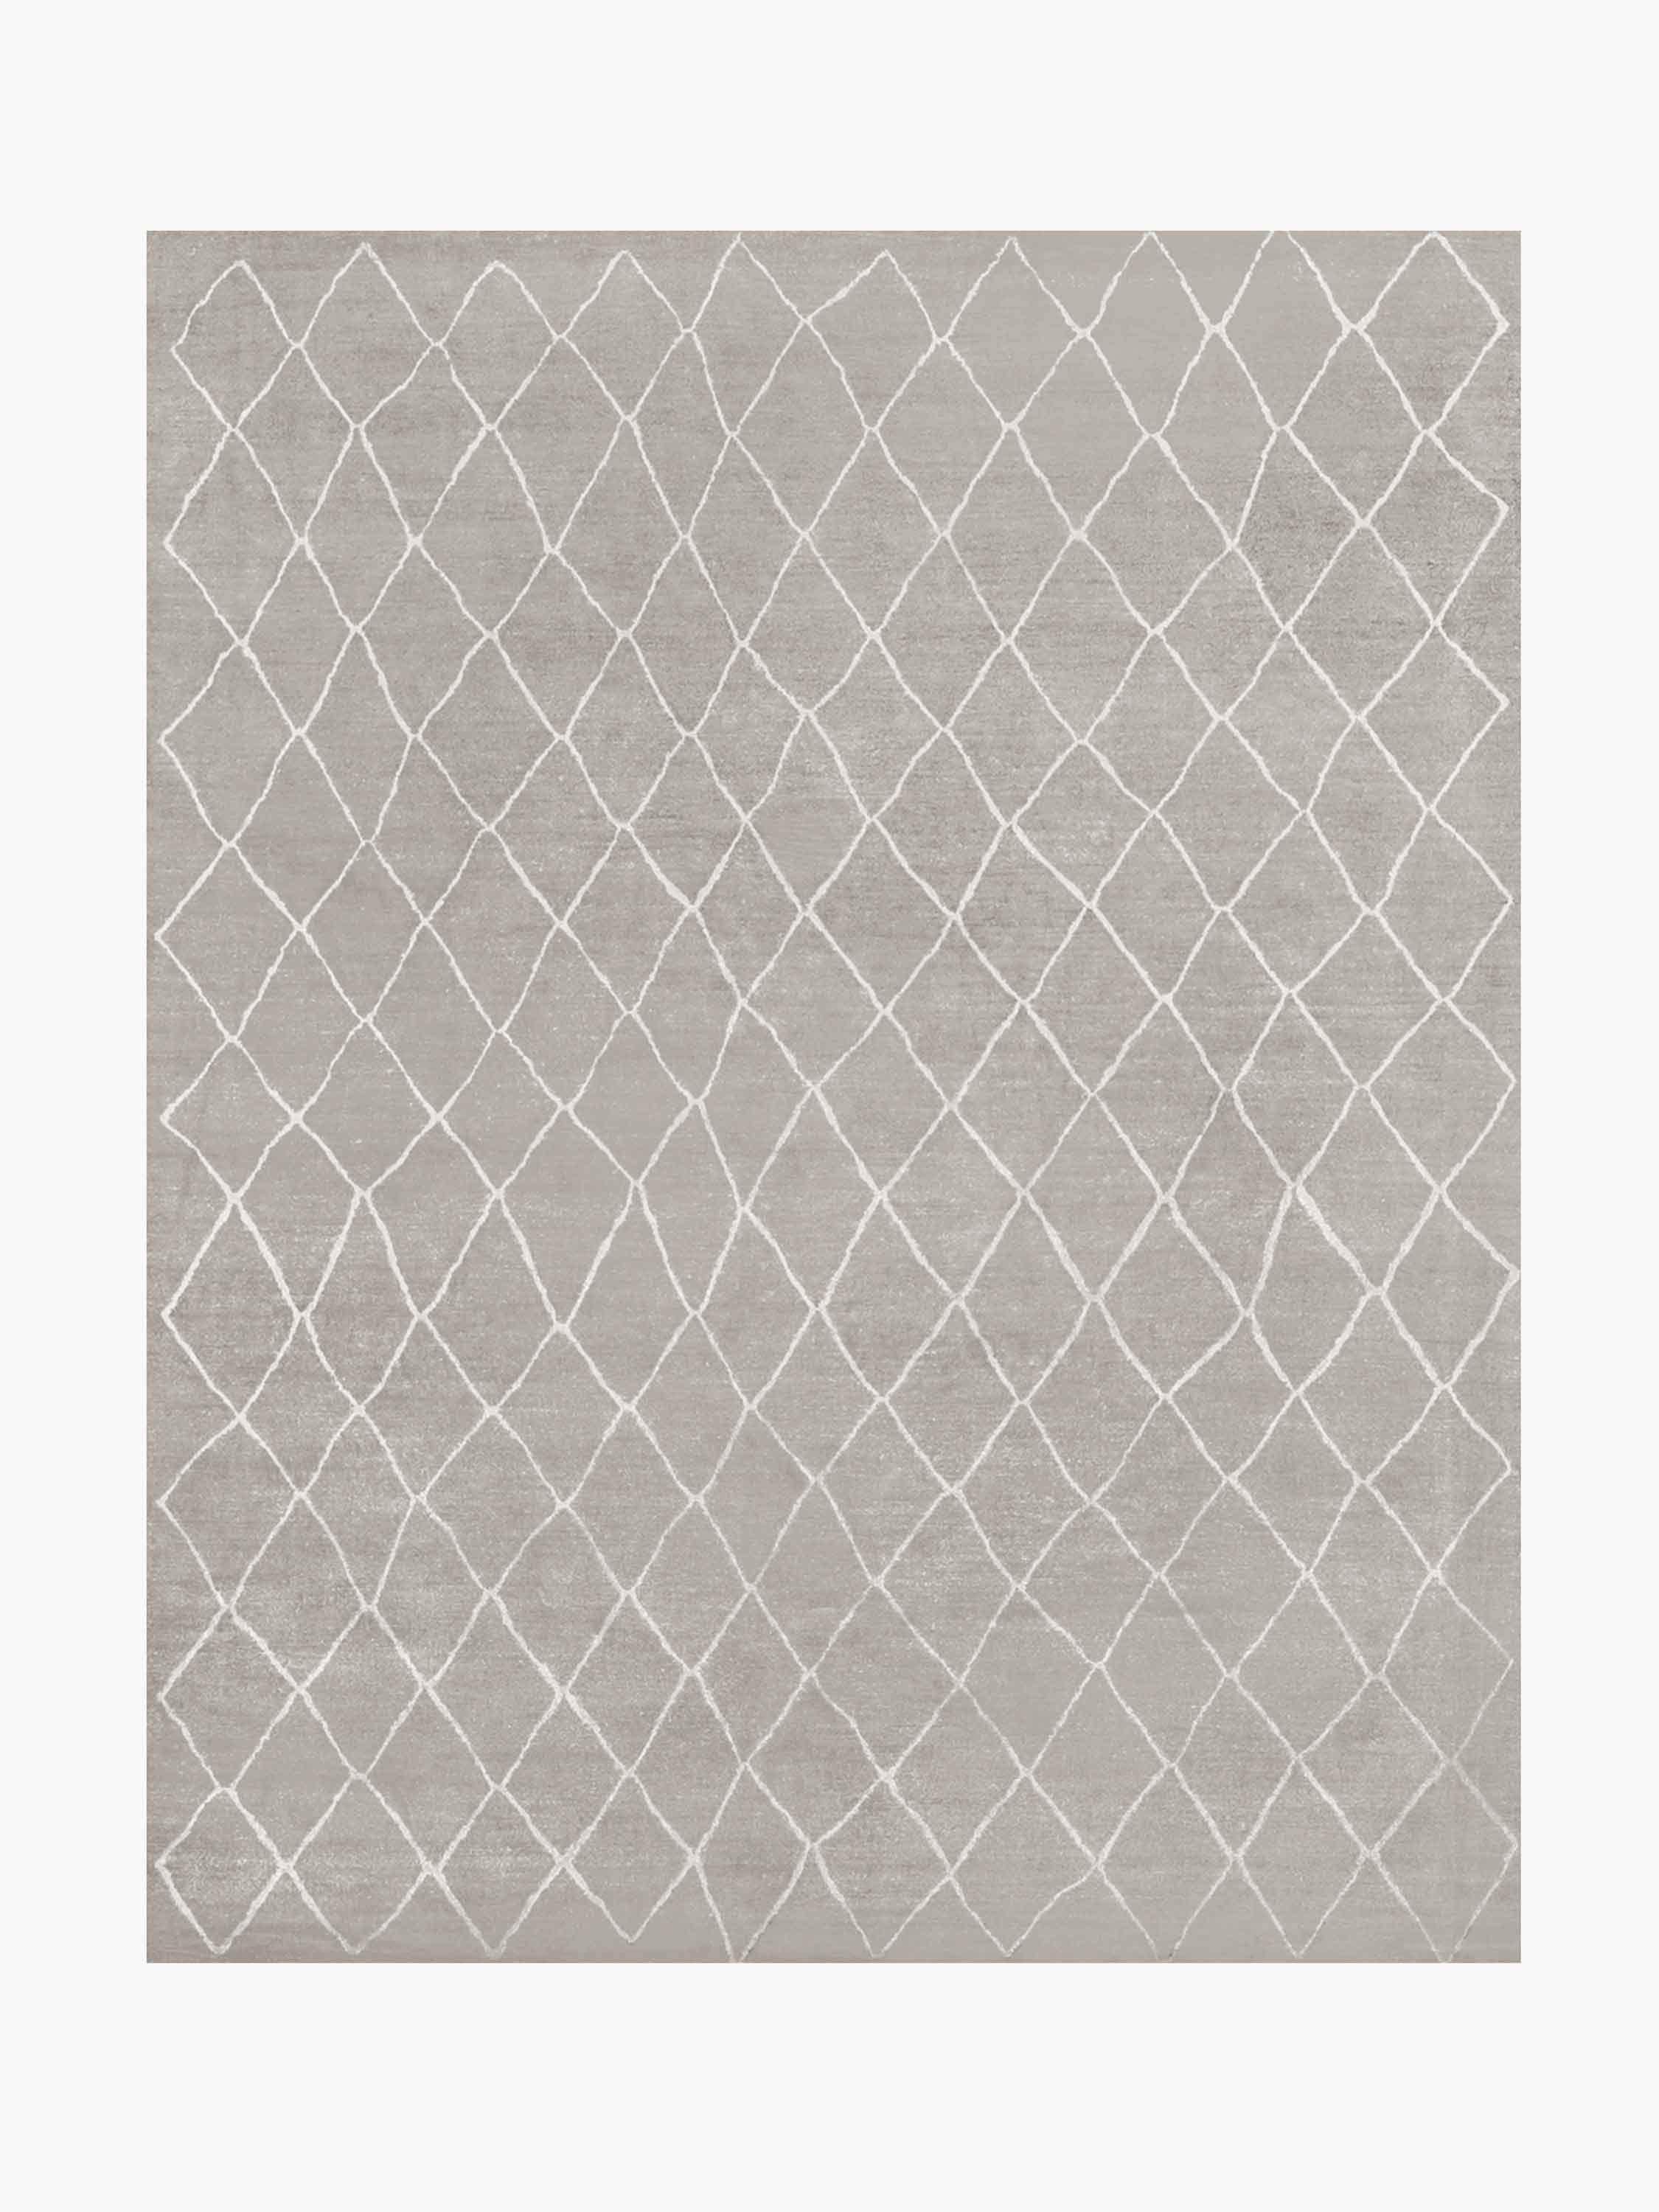 For Sale: Gray Ben Soleimani Arlequin Rug– Ultra-plush Hand-knotted Viscose Charcoal 6'x9'